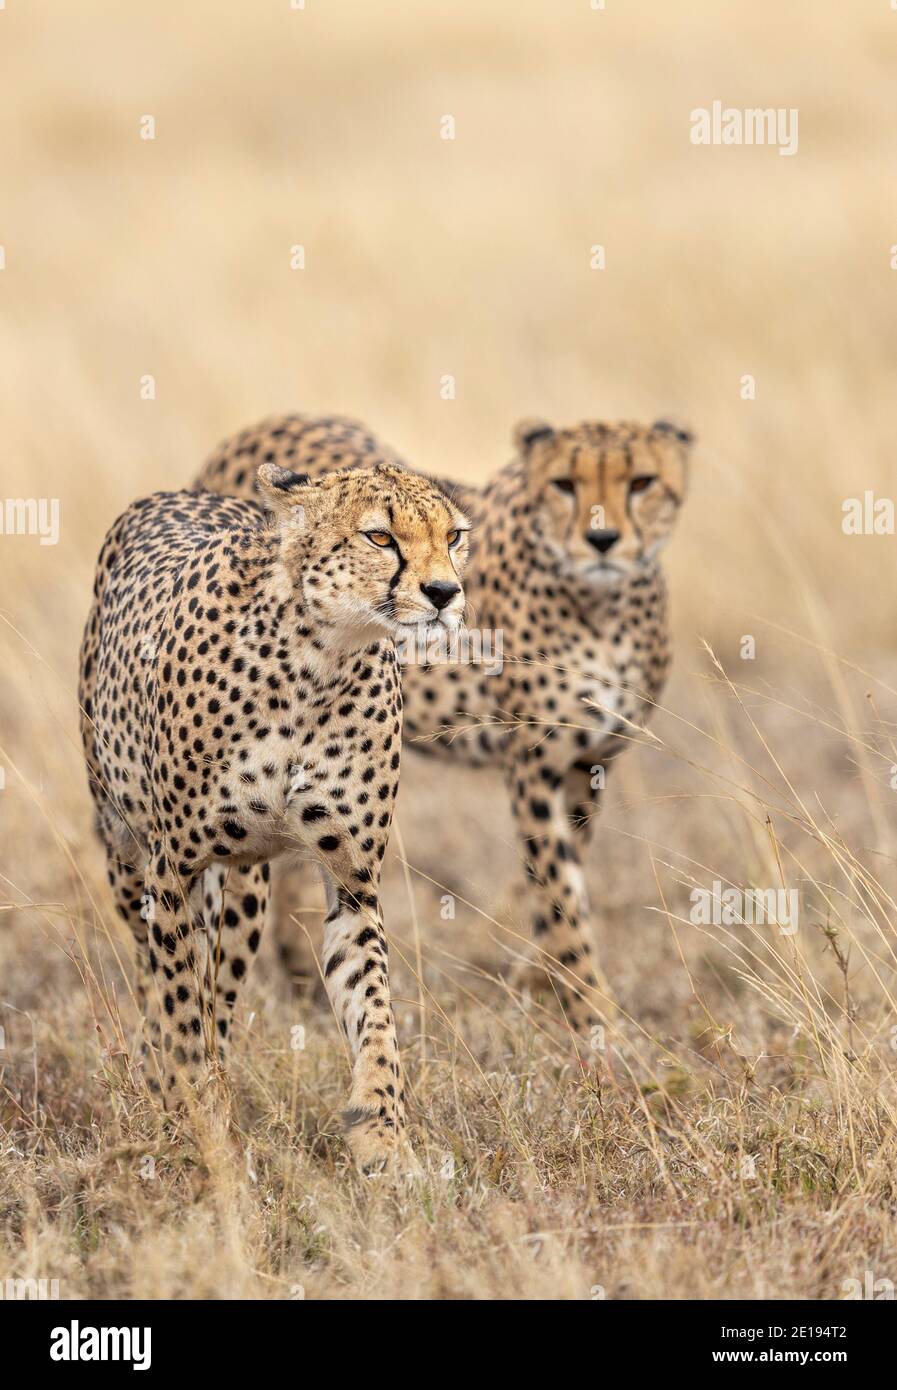 Vertical portrait of two adult cheetahs walking through dry grass plains of Serengeti National Park in Tanzania Stock Photo